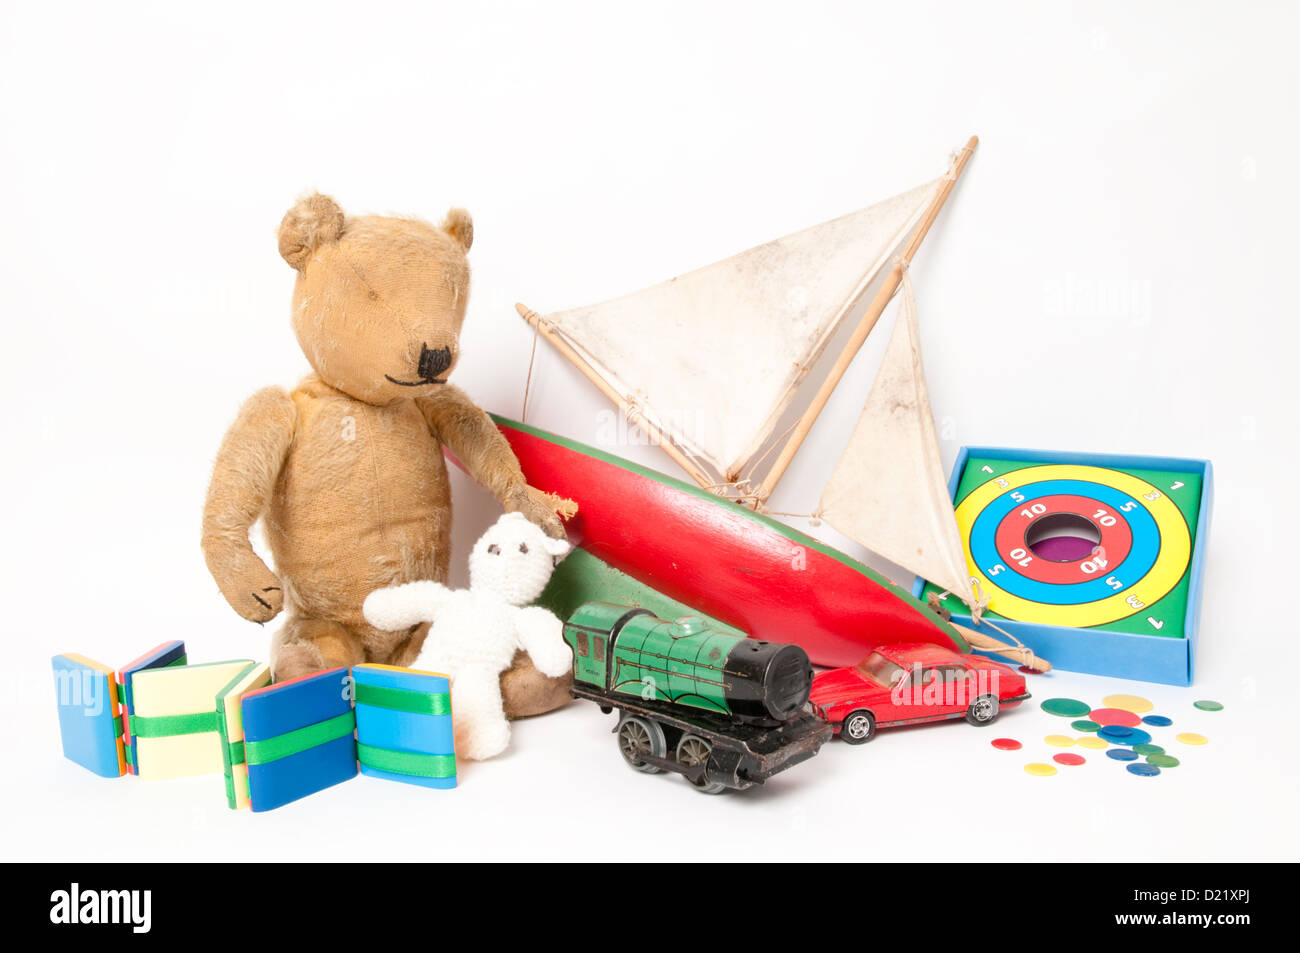 A collection of well-loved classic simple children's toys including a cute teddy bear, red wooden sailing boat, and  green train Stock Photo